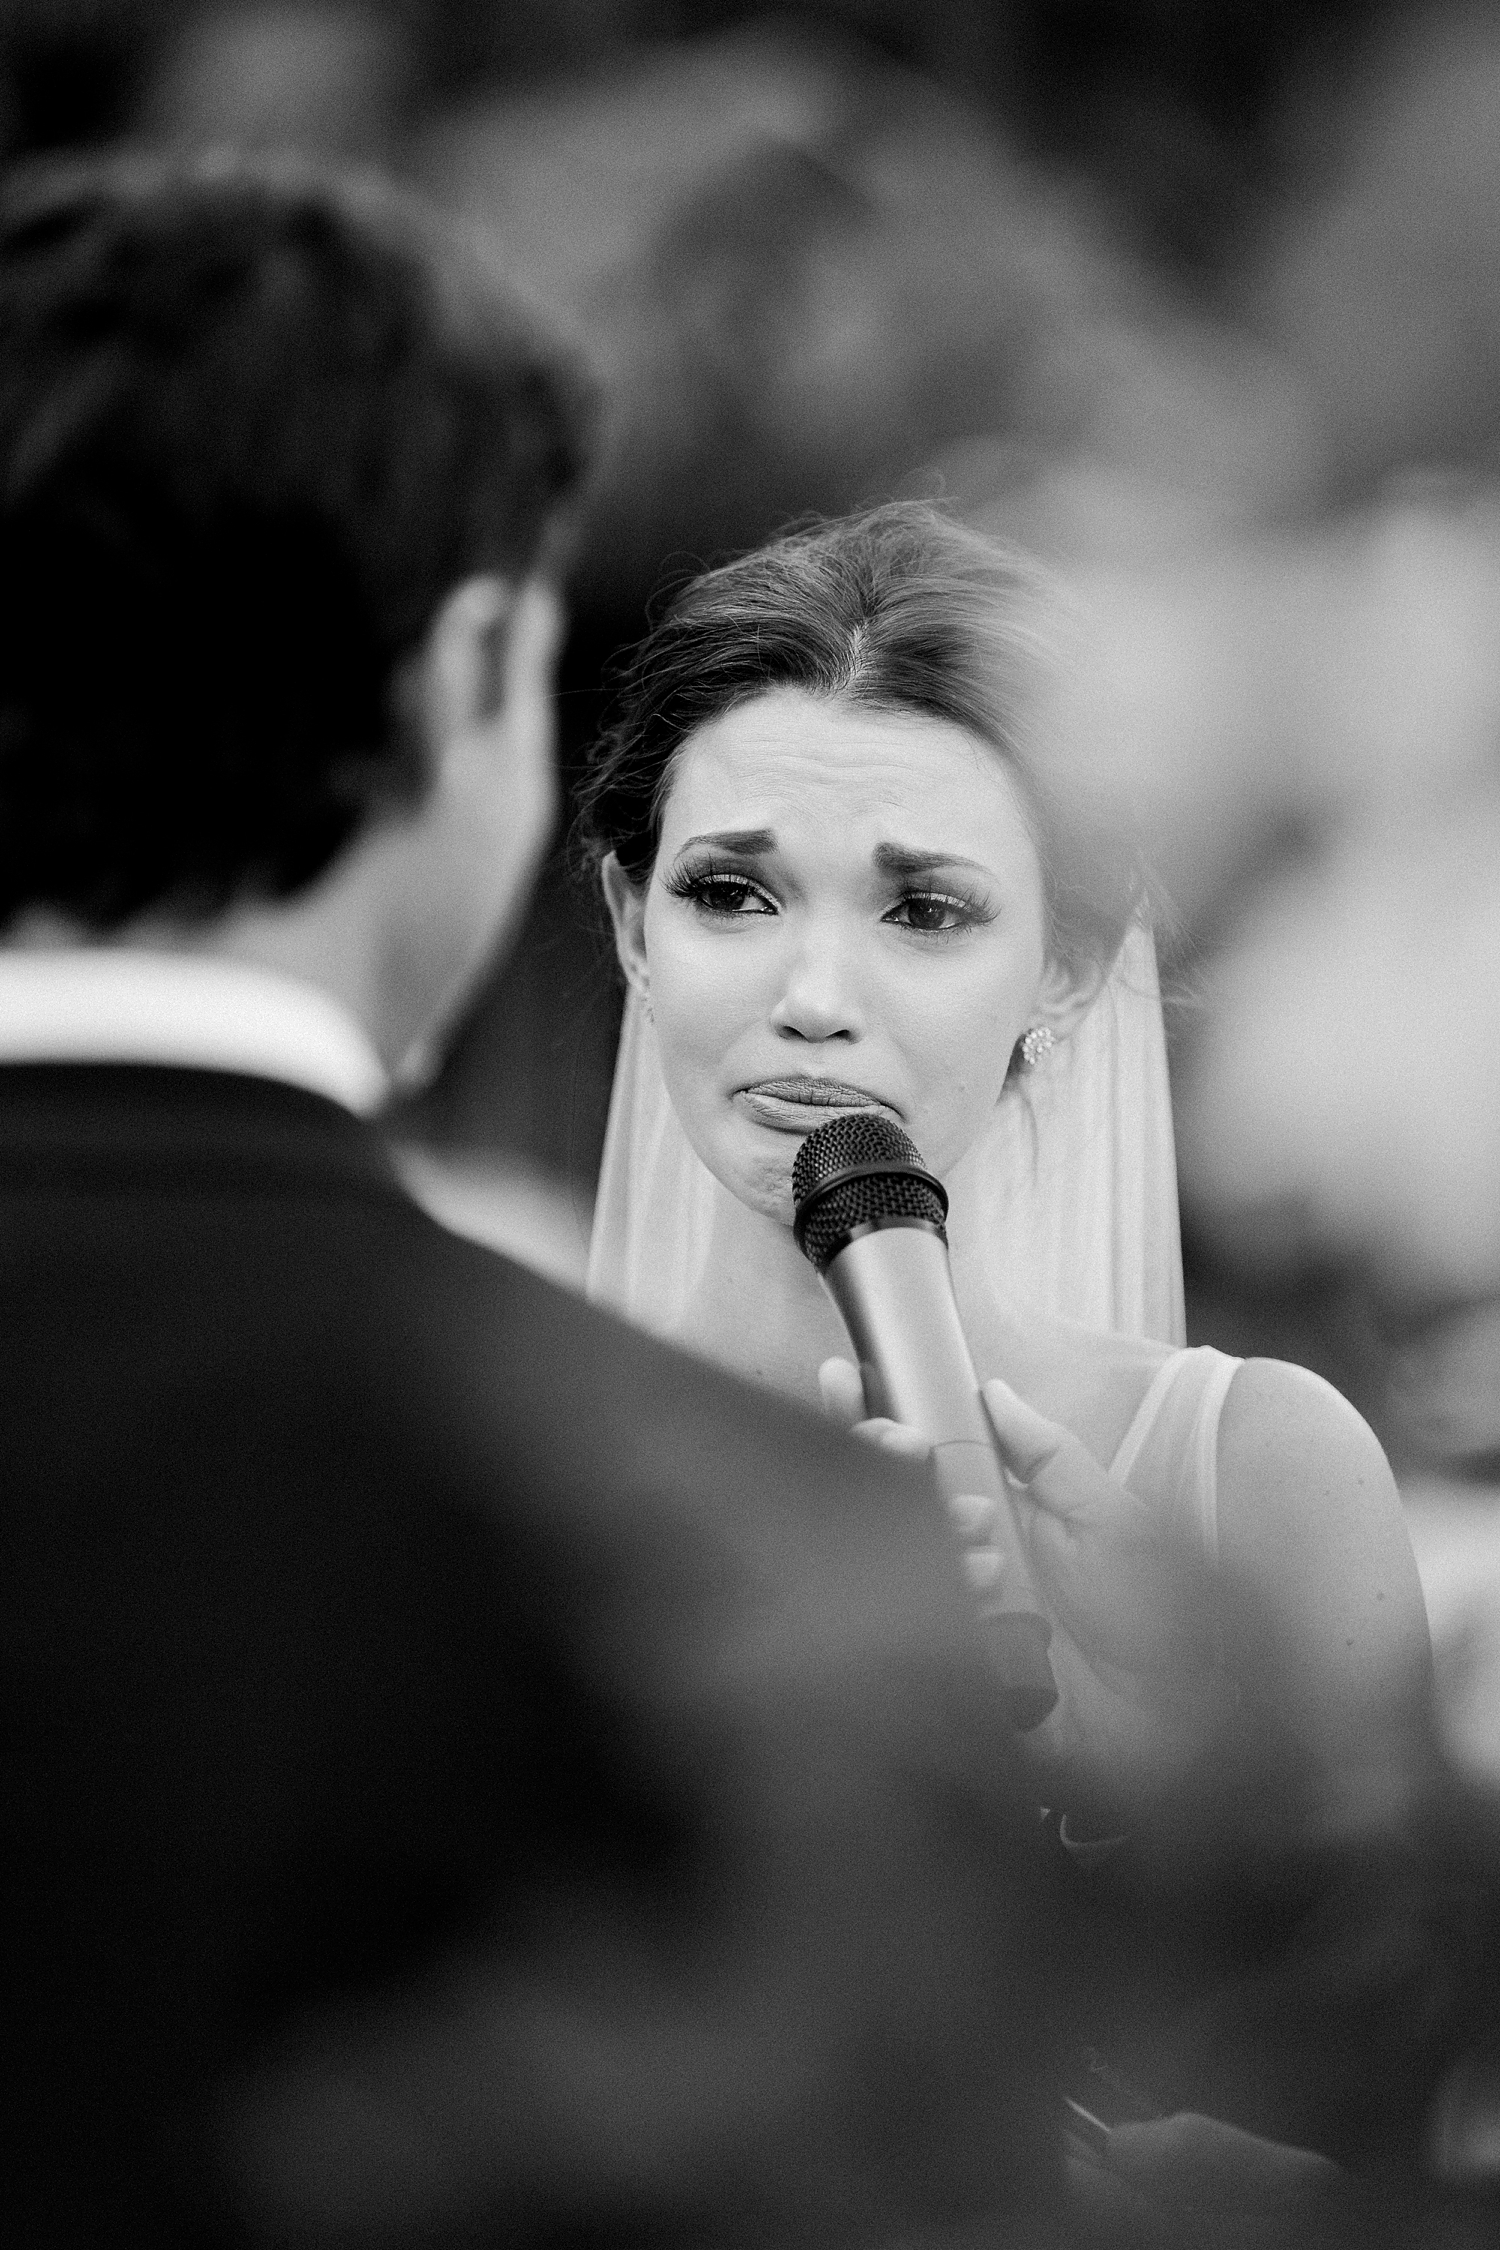 Crying Bride exchanging vows in microphone to groom during wedding ceremony black and white